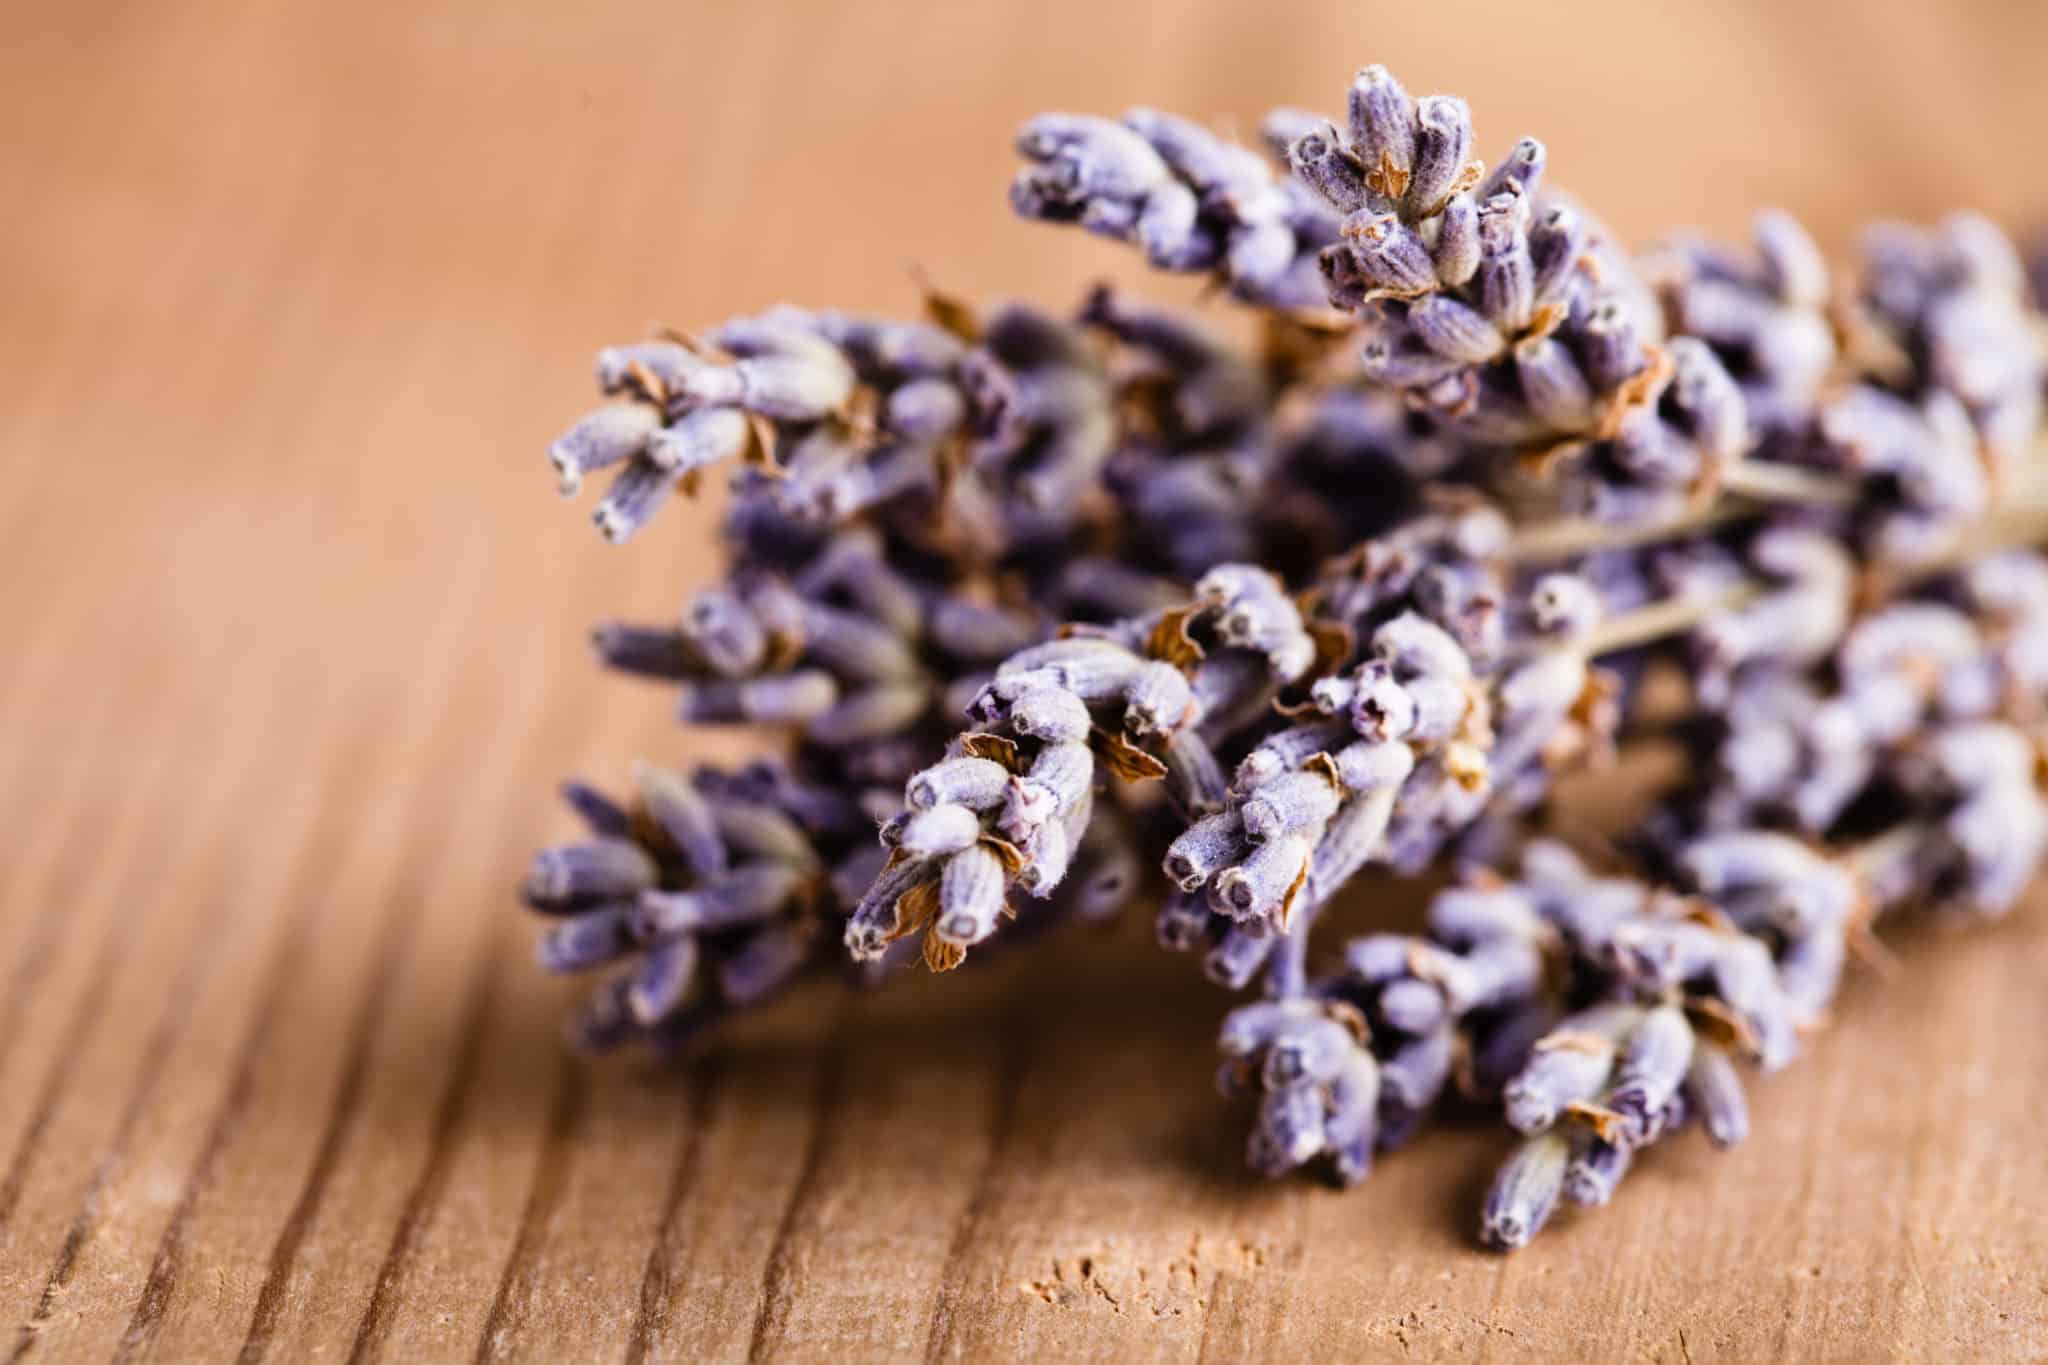 Lavender can reduce anxiety.